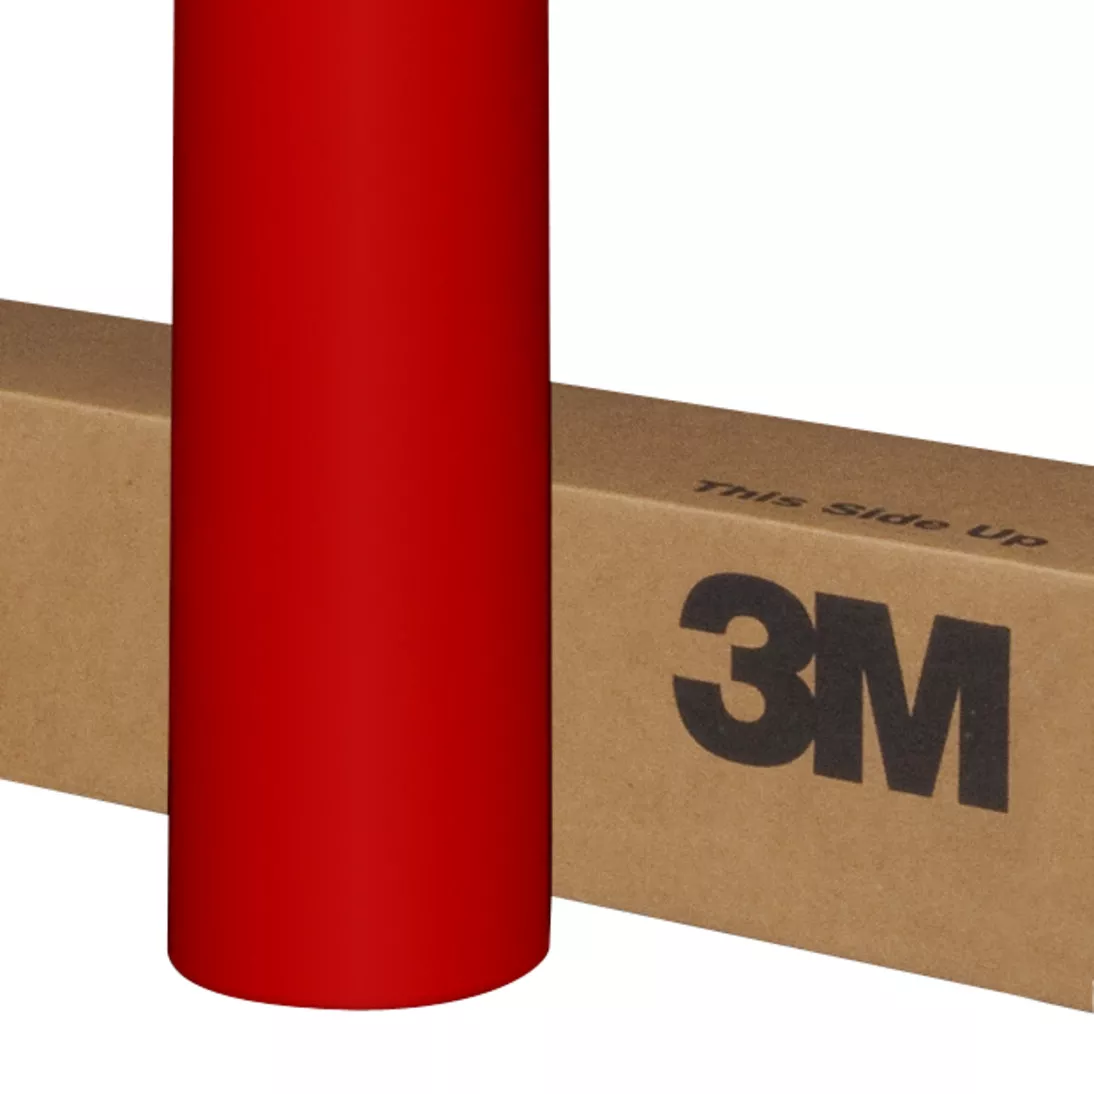 3M™ Scotchcal™ Graphic Film SC20100 5100R, Red, 48 in x 100 yd, 1
Roll/Case